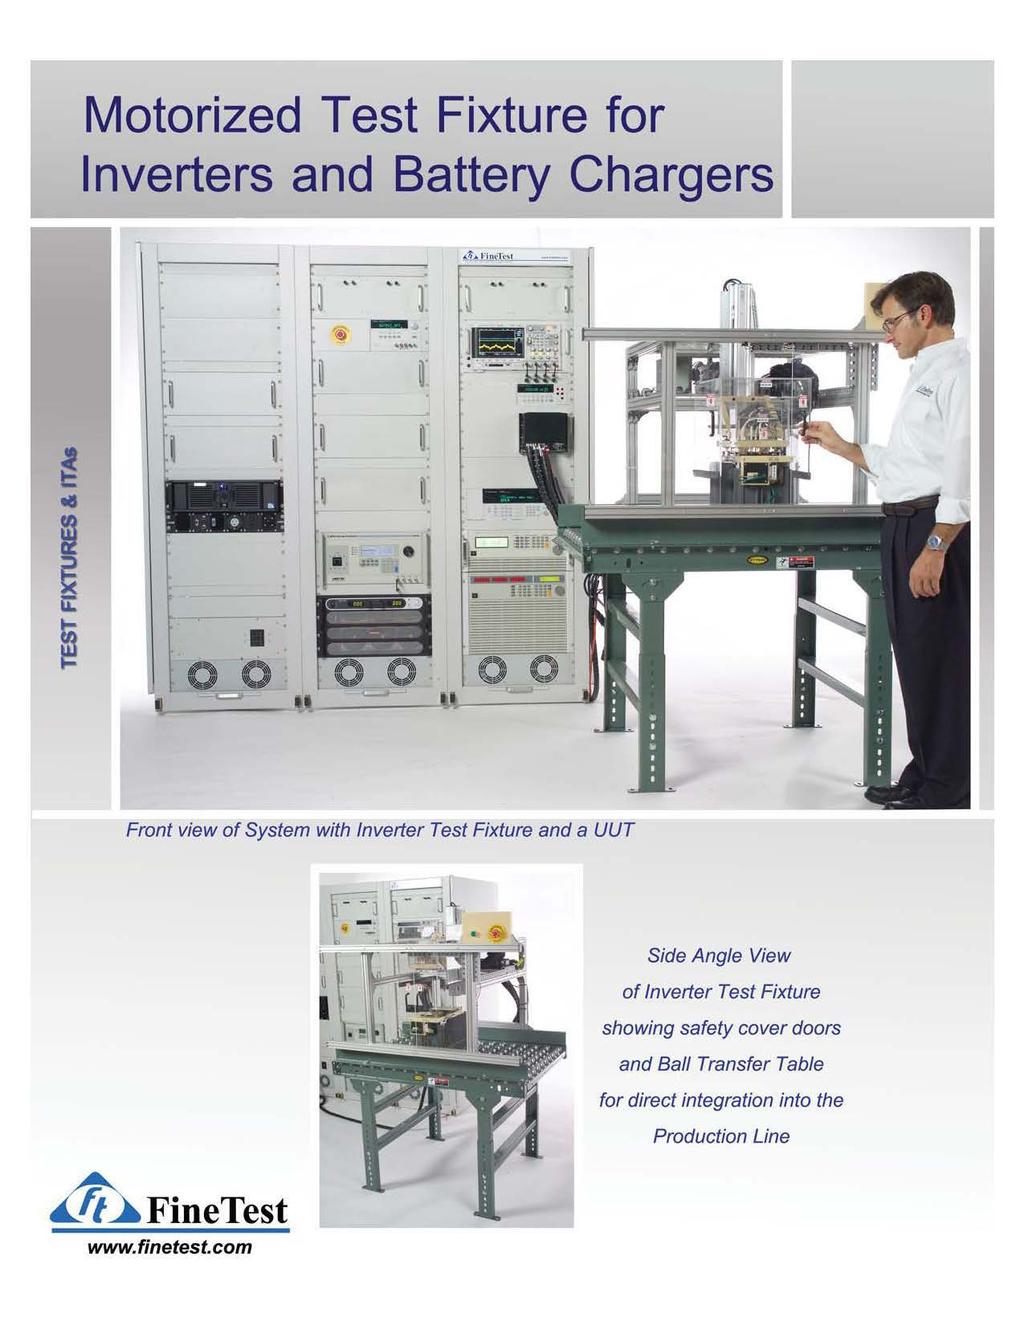 Motorized Test Fixture for Inverters and Battery Chargers. ~ [ J....,. - r.$.... ij ~ "1 r ~ ~. -..... :-